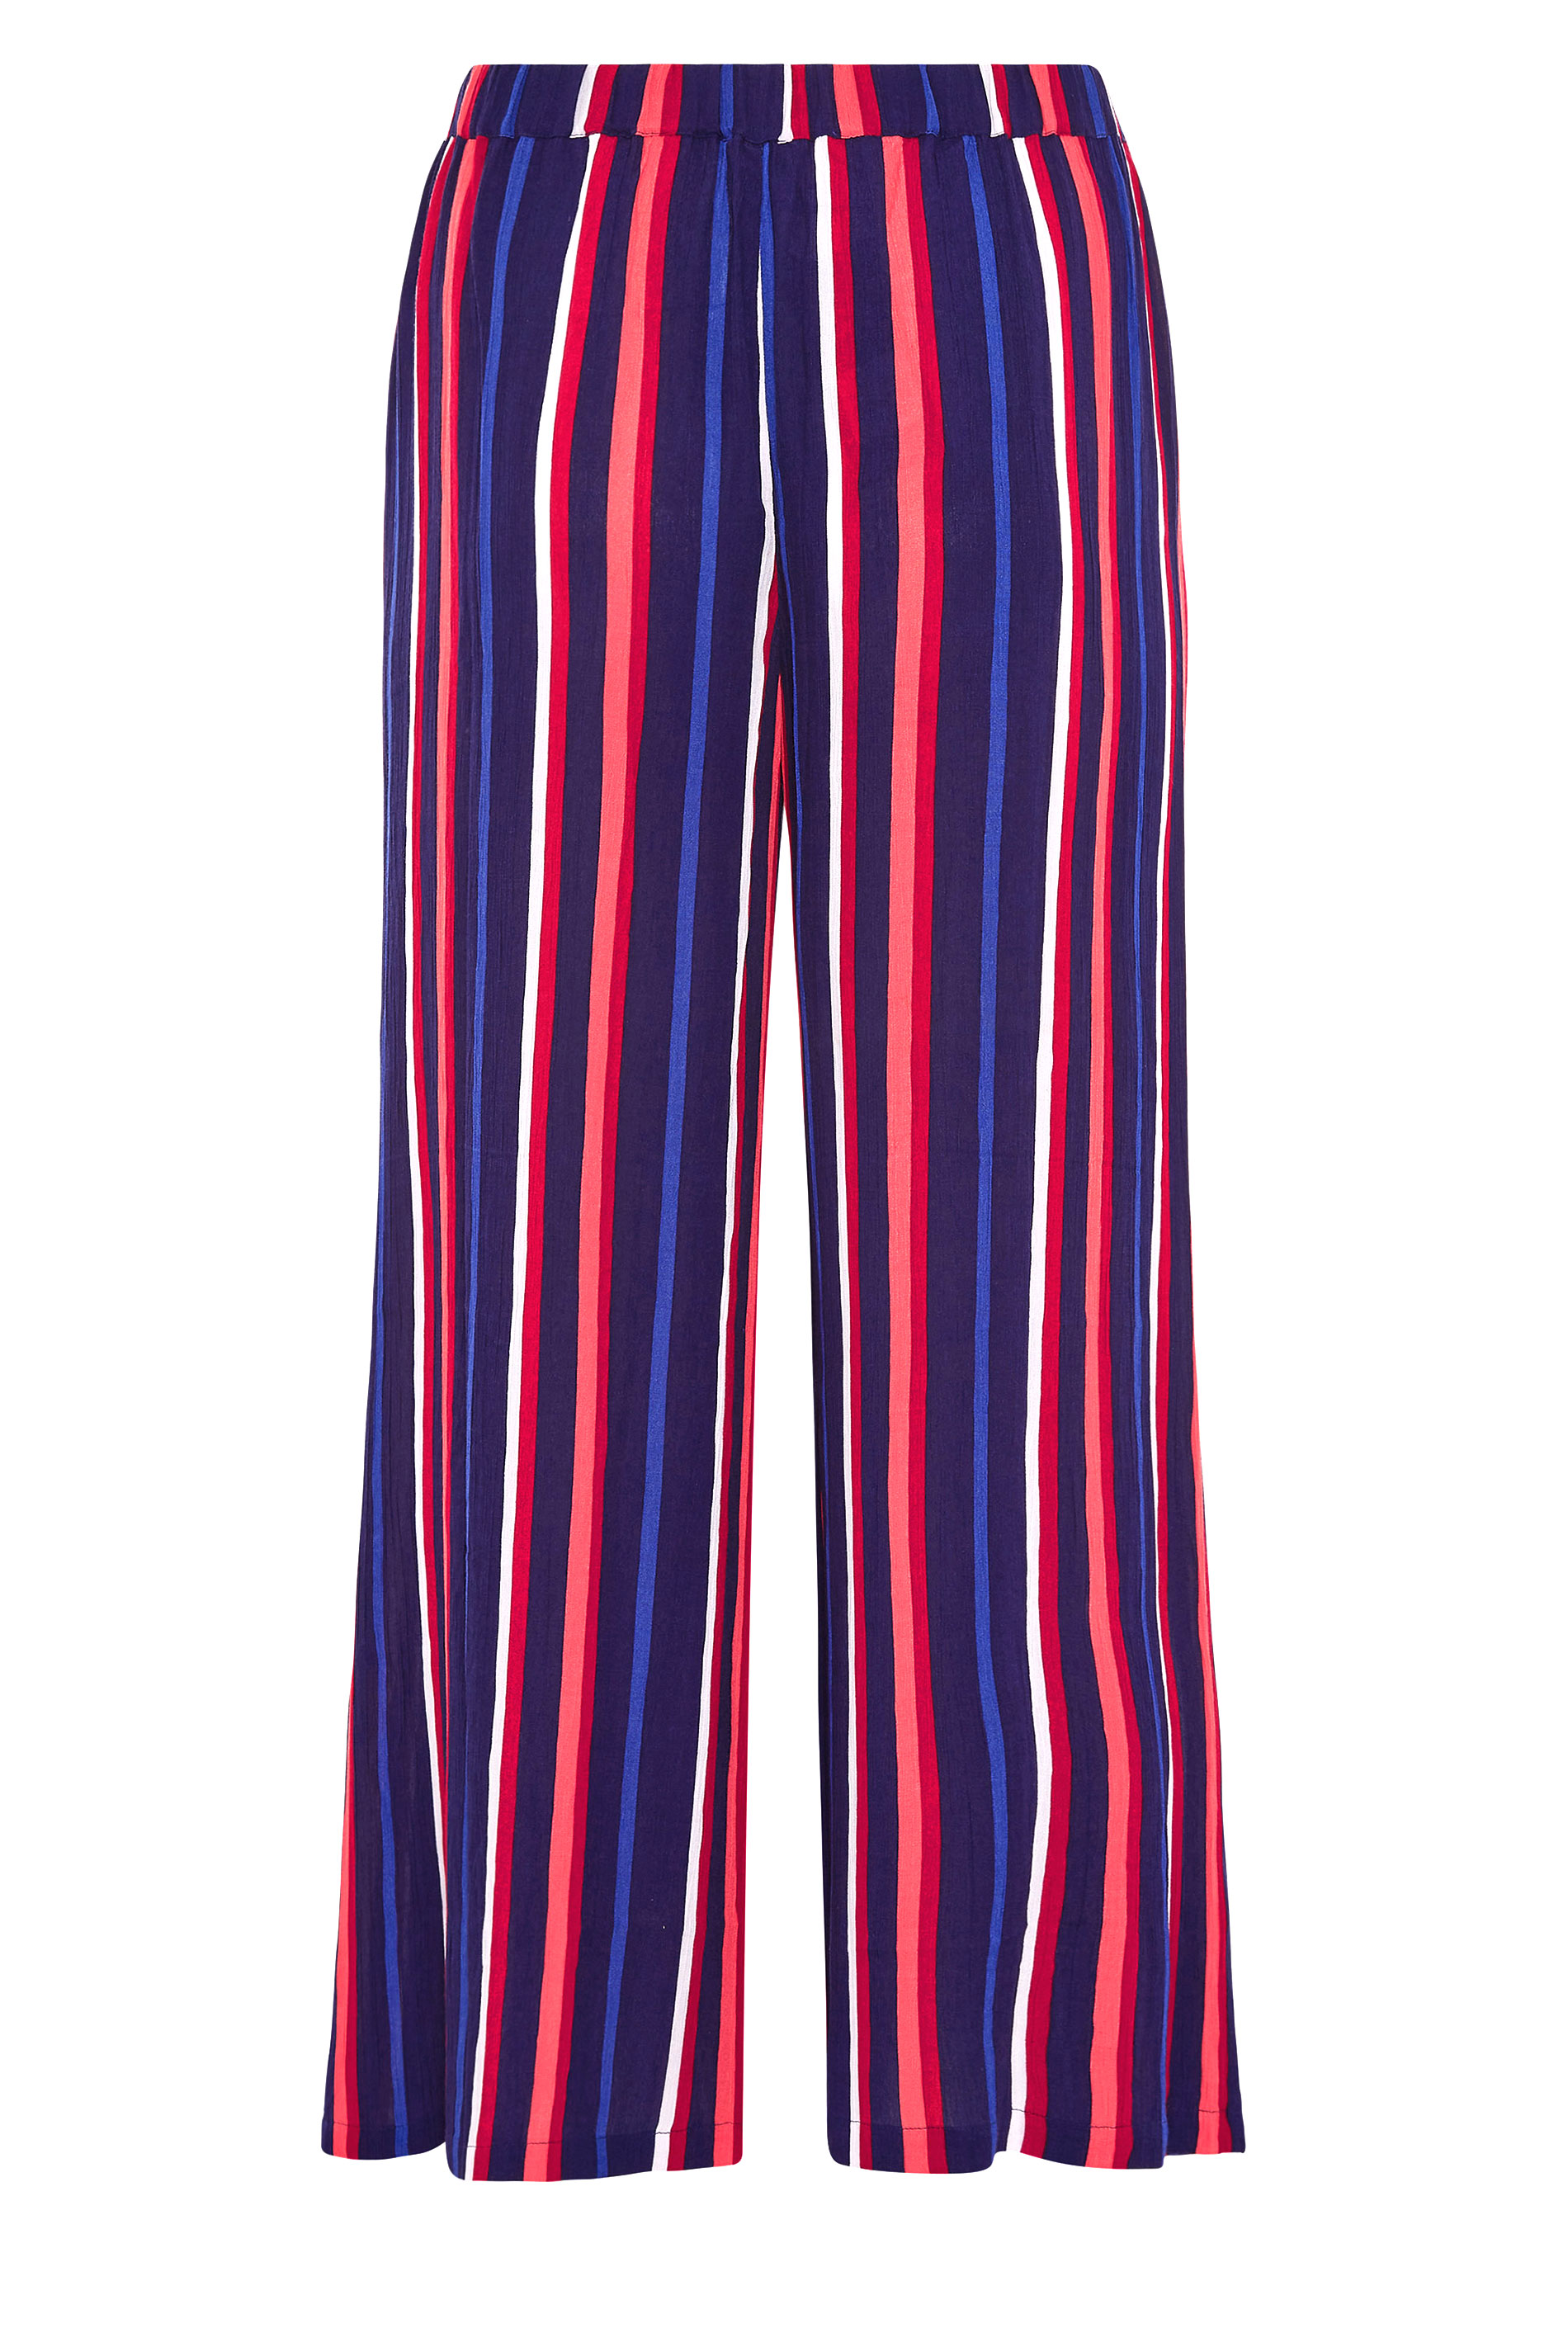 LIMITED COLLECTION Blue Multicoloured Stripe Wide Leg Trousers | Yours ...